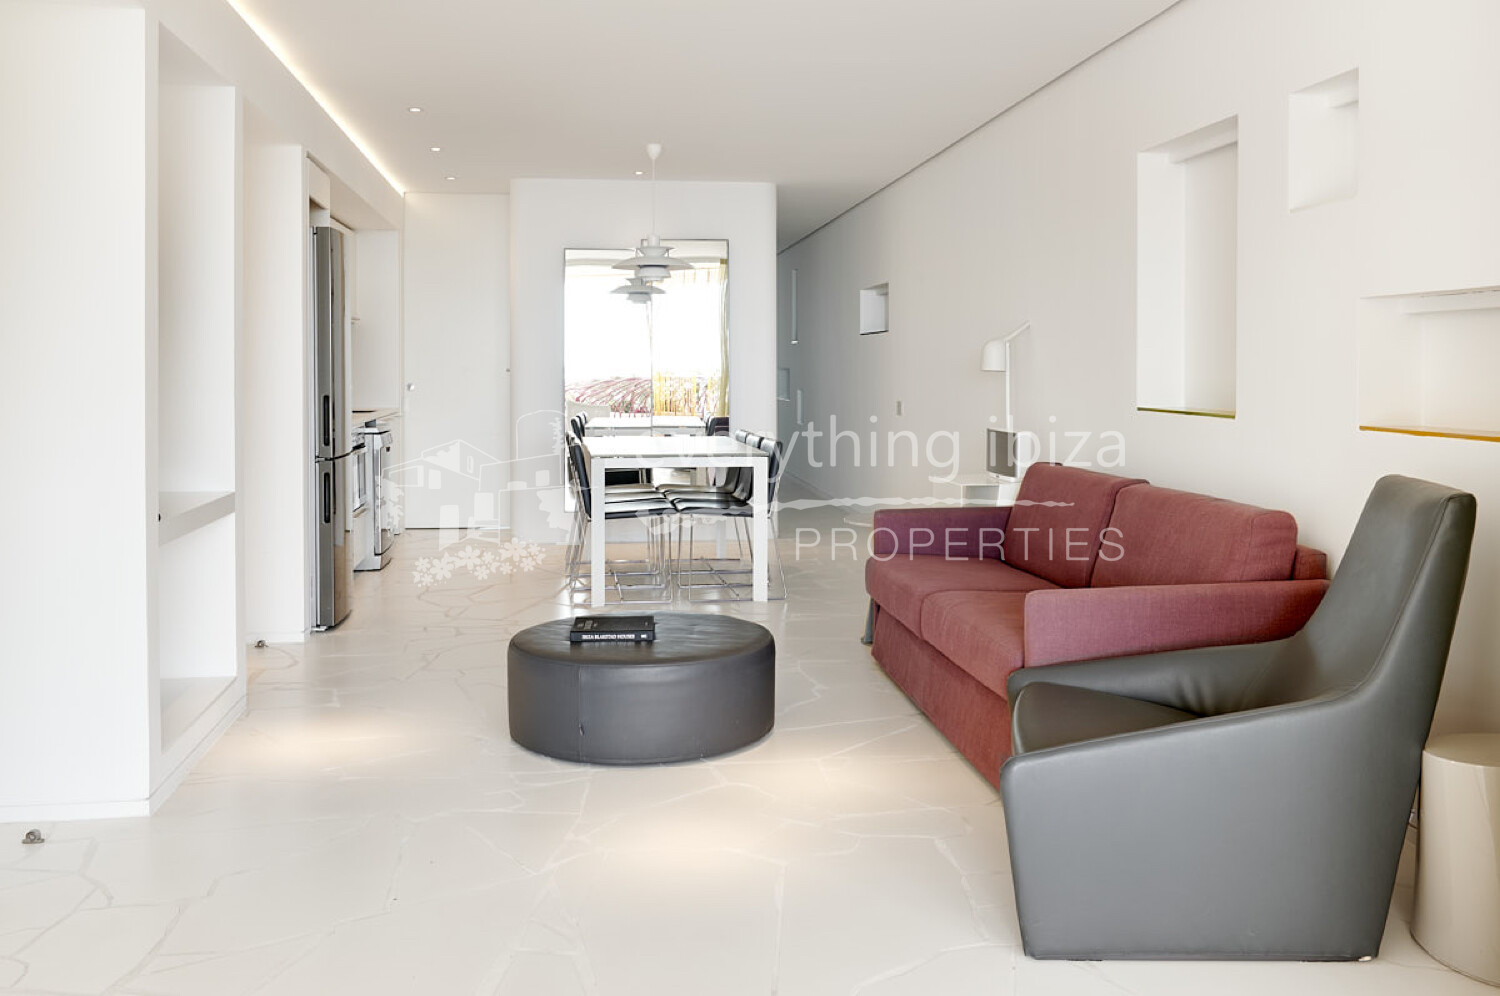 Contemporary Apartment near Talamanca Overlooking the Yachting Marina and Ibiza Old Town, ref. 1669, for sale in Ibiza by everything ibiza Properties